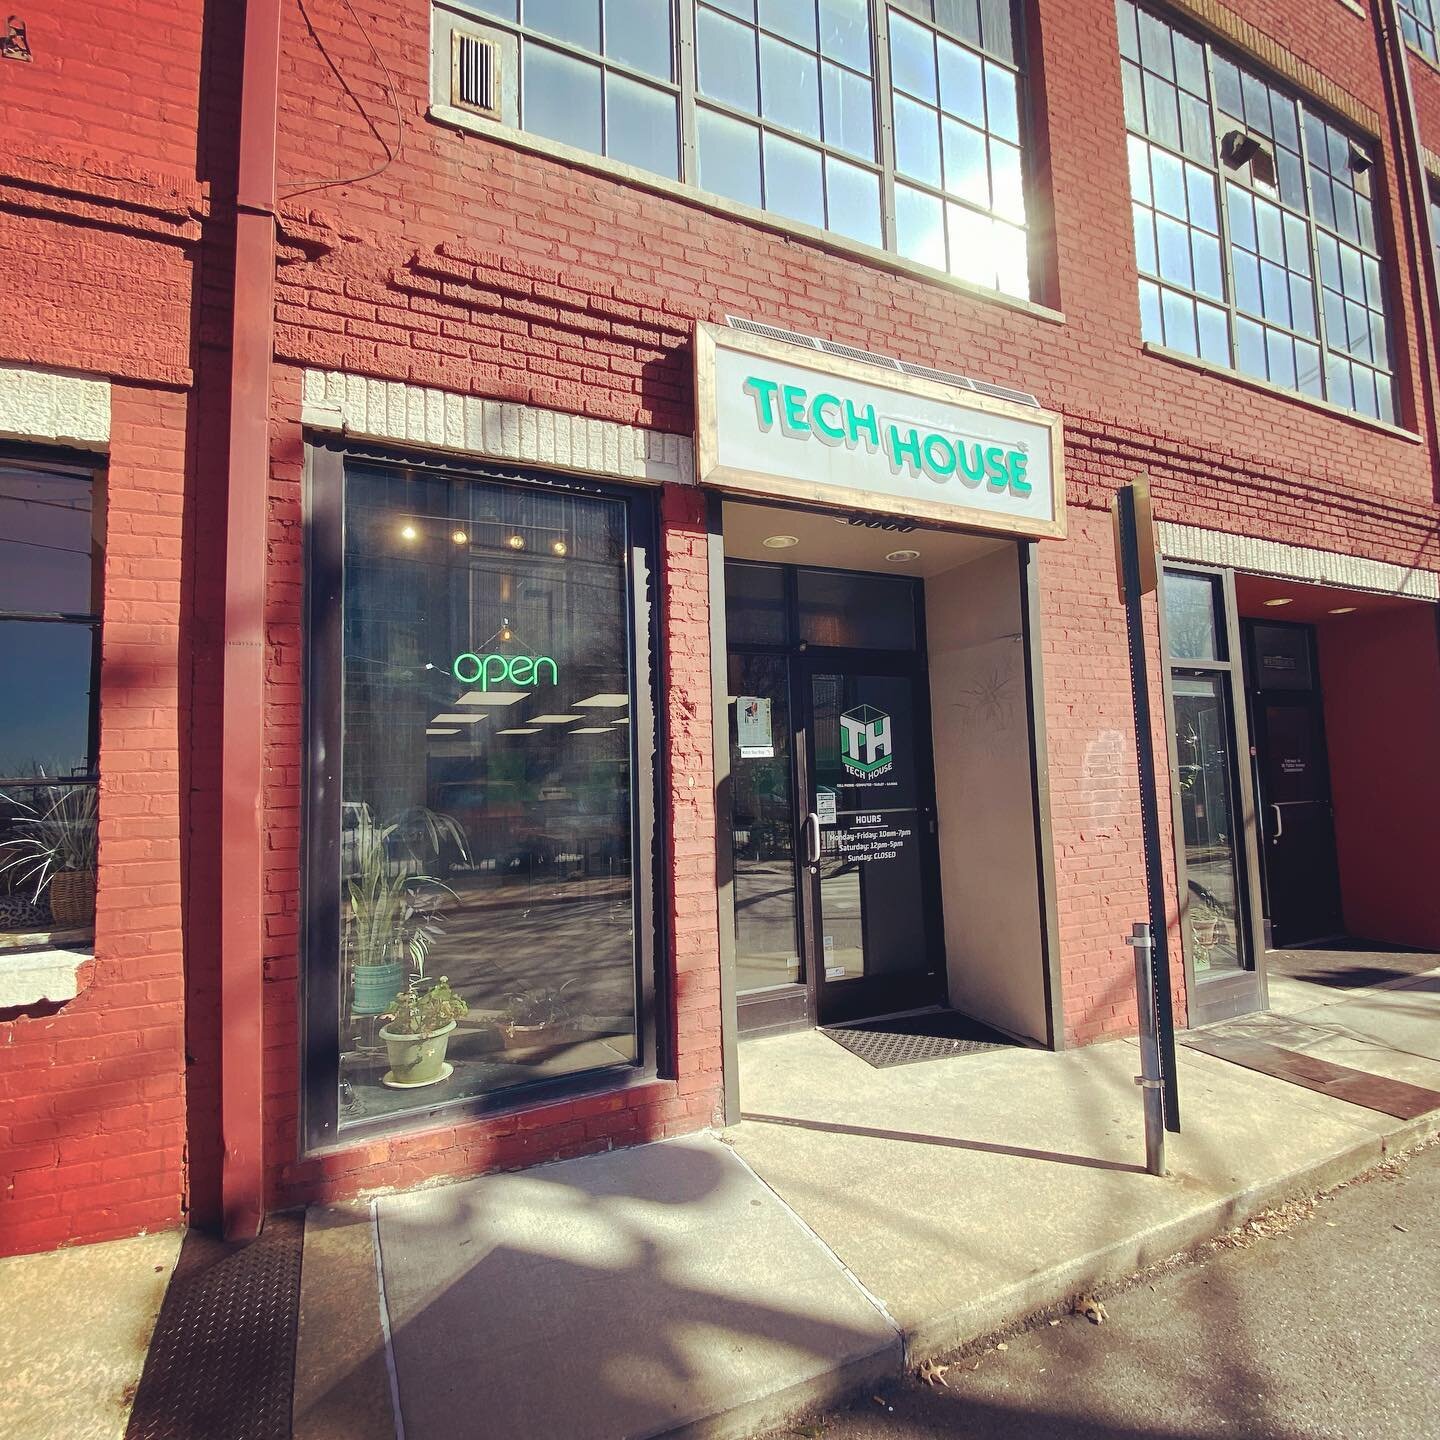 Happy Monday folks! The sun is shining bright on Tech House this morning! 🌞 We will be open all this week from 10am-7pm, coming up with creative solutions for your tech needs 🤓
&mdash;&mdash;&mdash;&mdash;&gt;&gt;&gt;Swipe for Monday memes! 
#downt